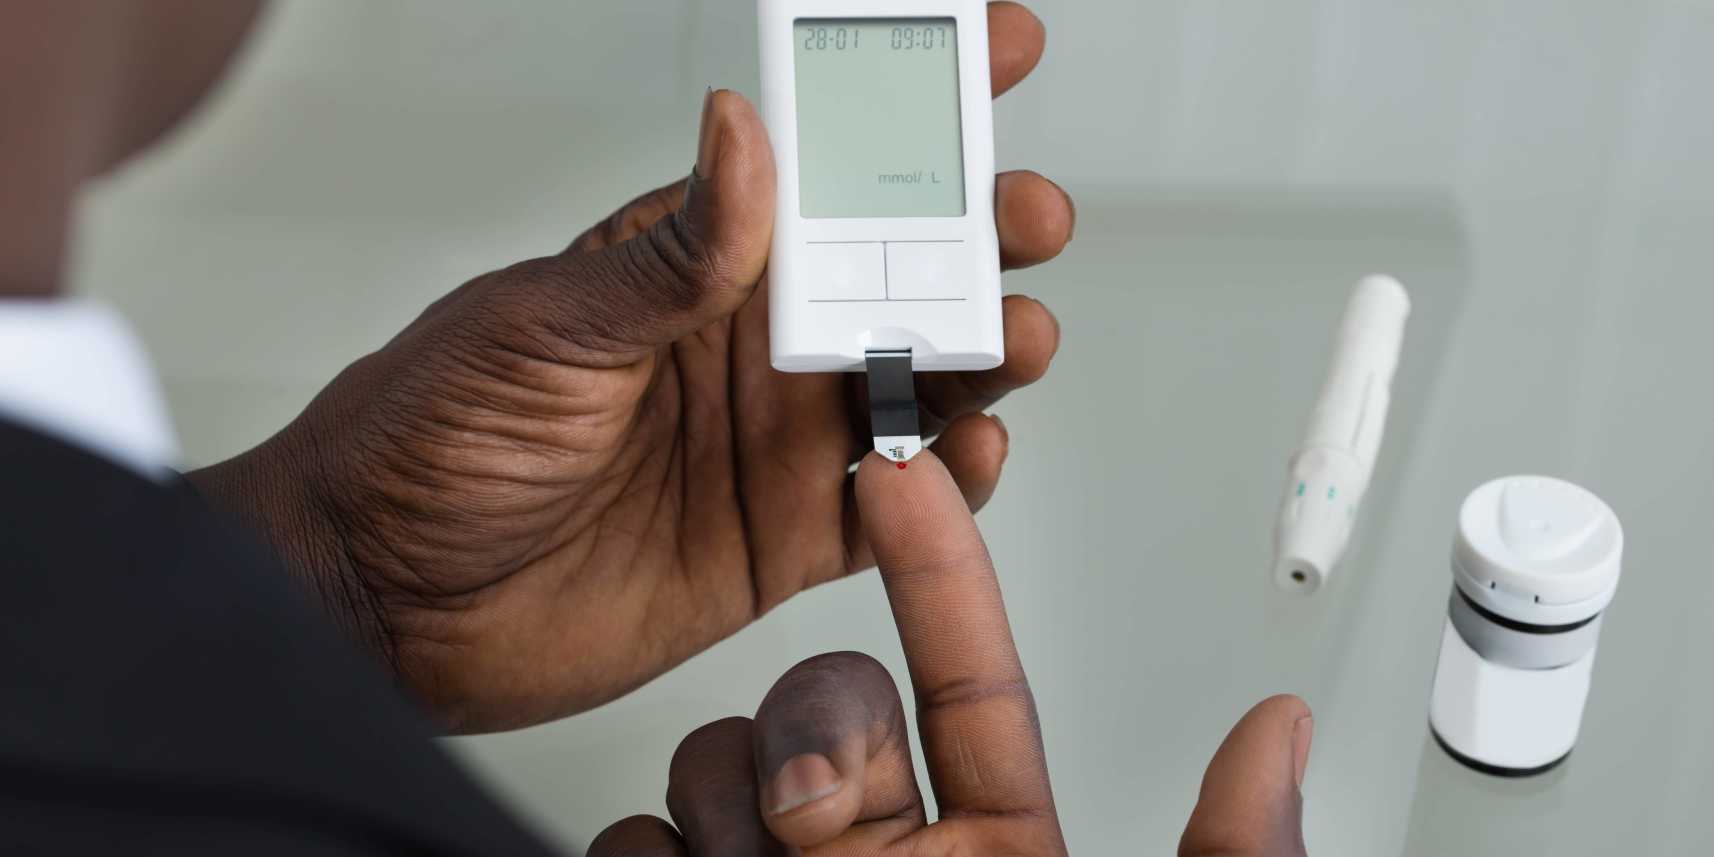 Man using glucometer to check blood sugar levels while wondering about blood sugar and weight loss